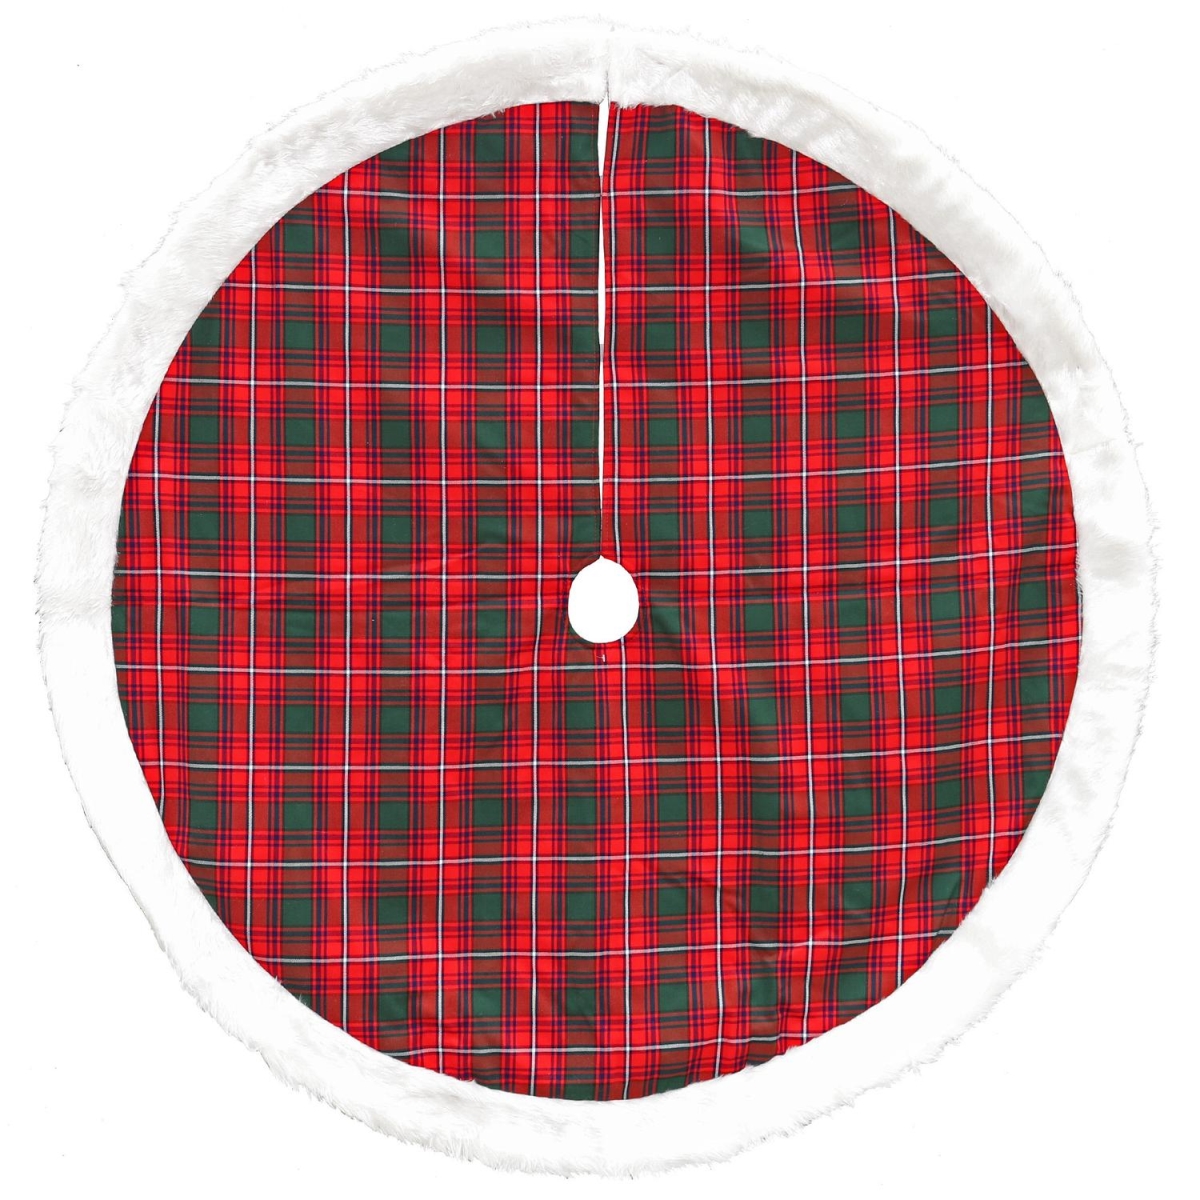 32636948 48 In. Plaid Christmas Tree Skirt With Plush Border, Red & Green